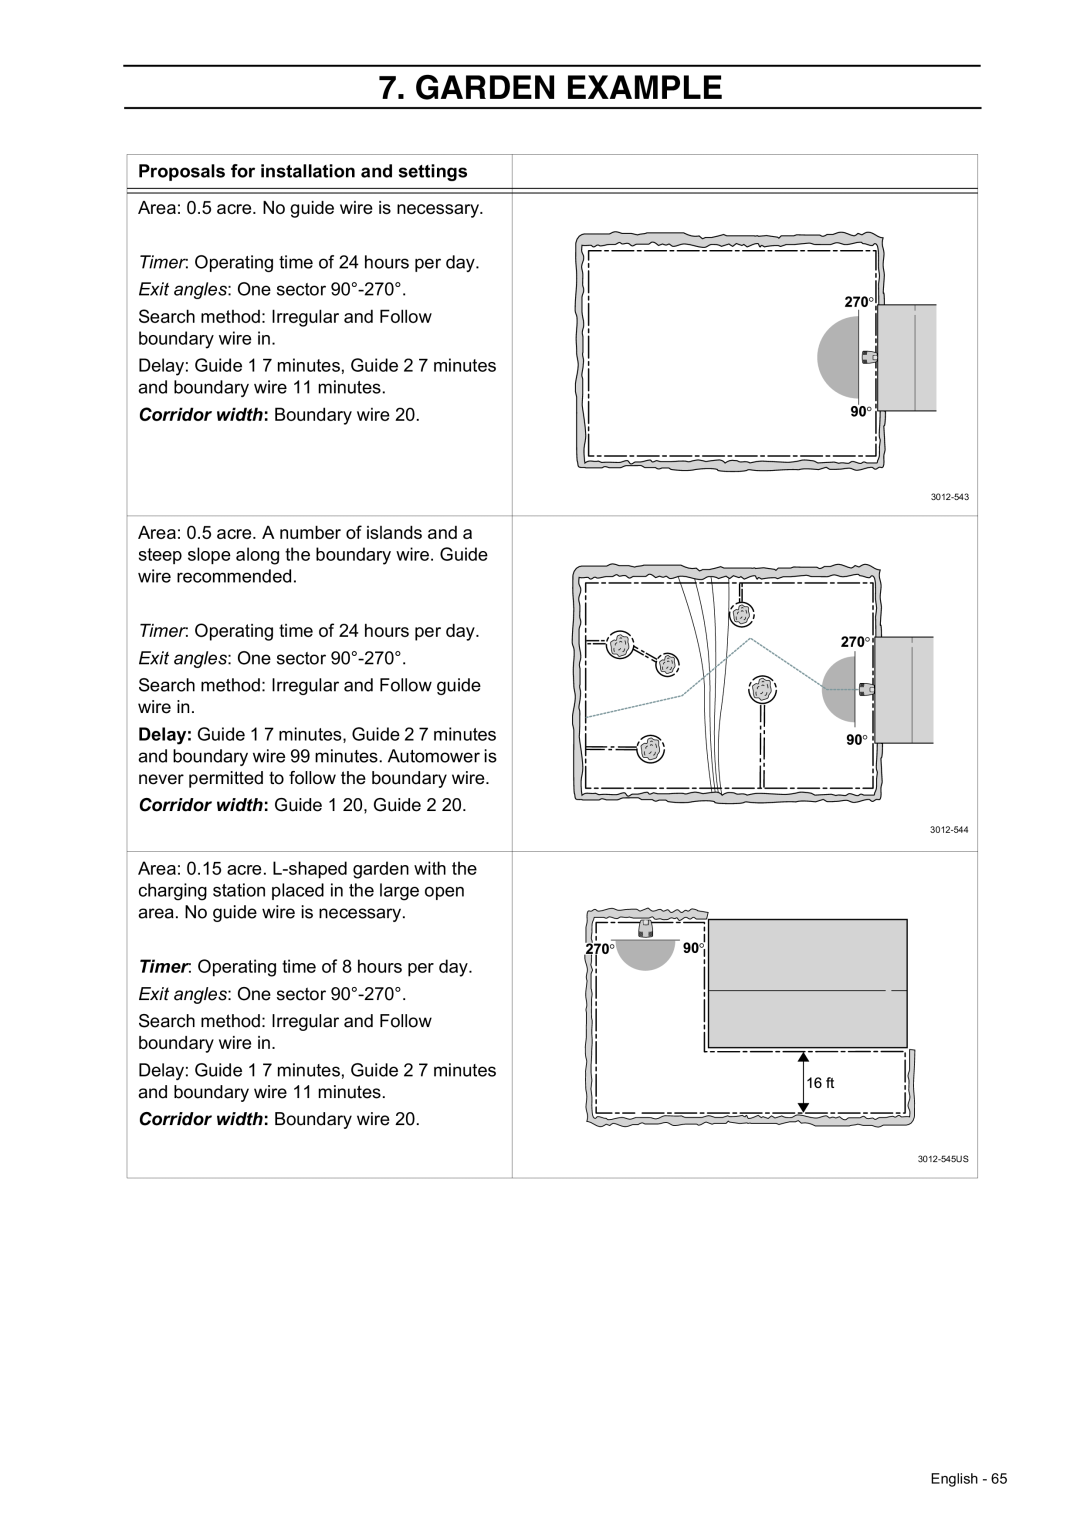 Husqvarna 230 ACX/220 AC manual Garden Example, Proposals for installation and settings, 3012-543 3012-544 3012-545US 